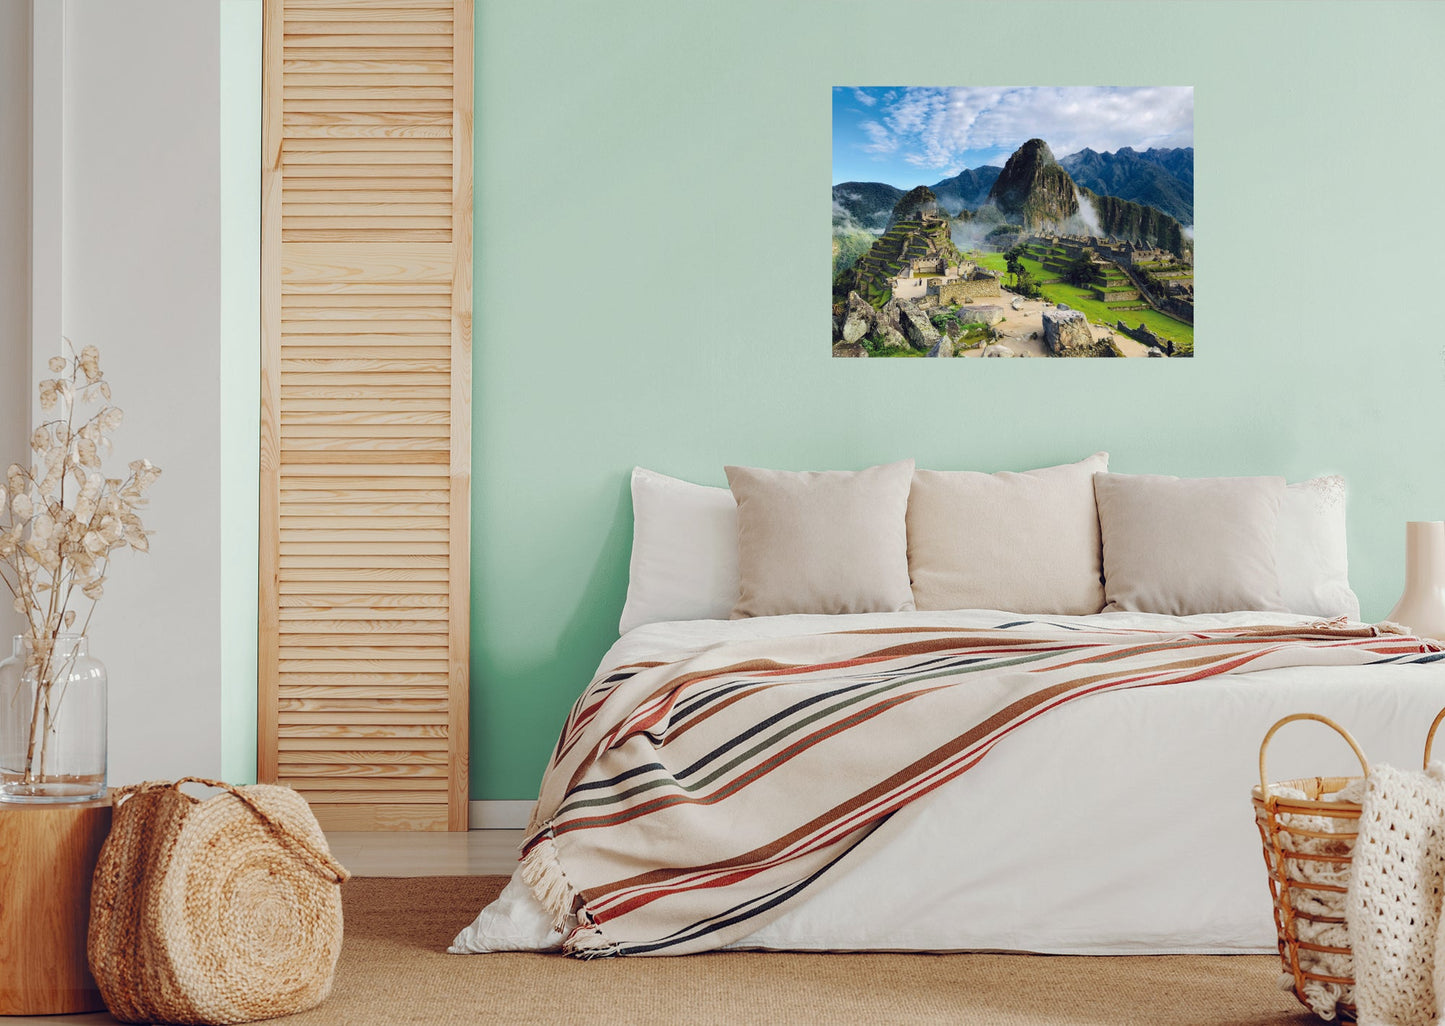 Popular Landmarks: Machu Picchu Realistic Poster - Removable Adhesive Decal